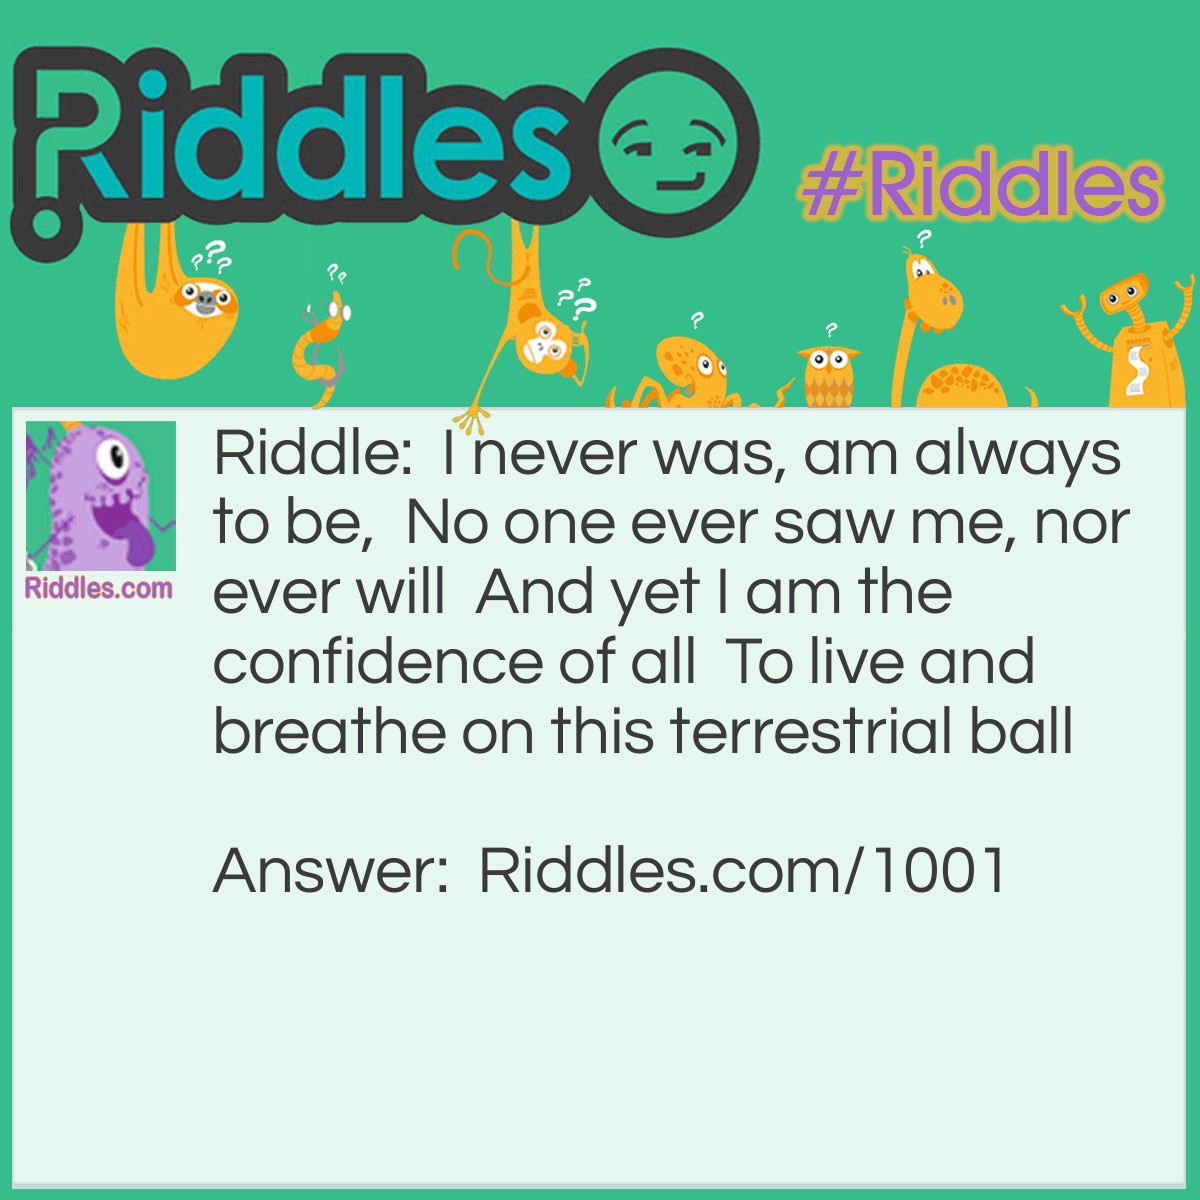 Riddle: I never was, am always to be,  No one ever saw me, nor ever will  And yet I am the confidence of all  To live and breathe on this terrestrial ball What am I? Answer: I am Tomorrow